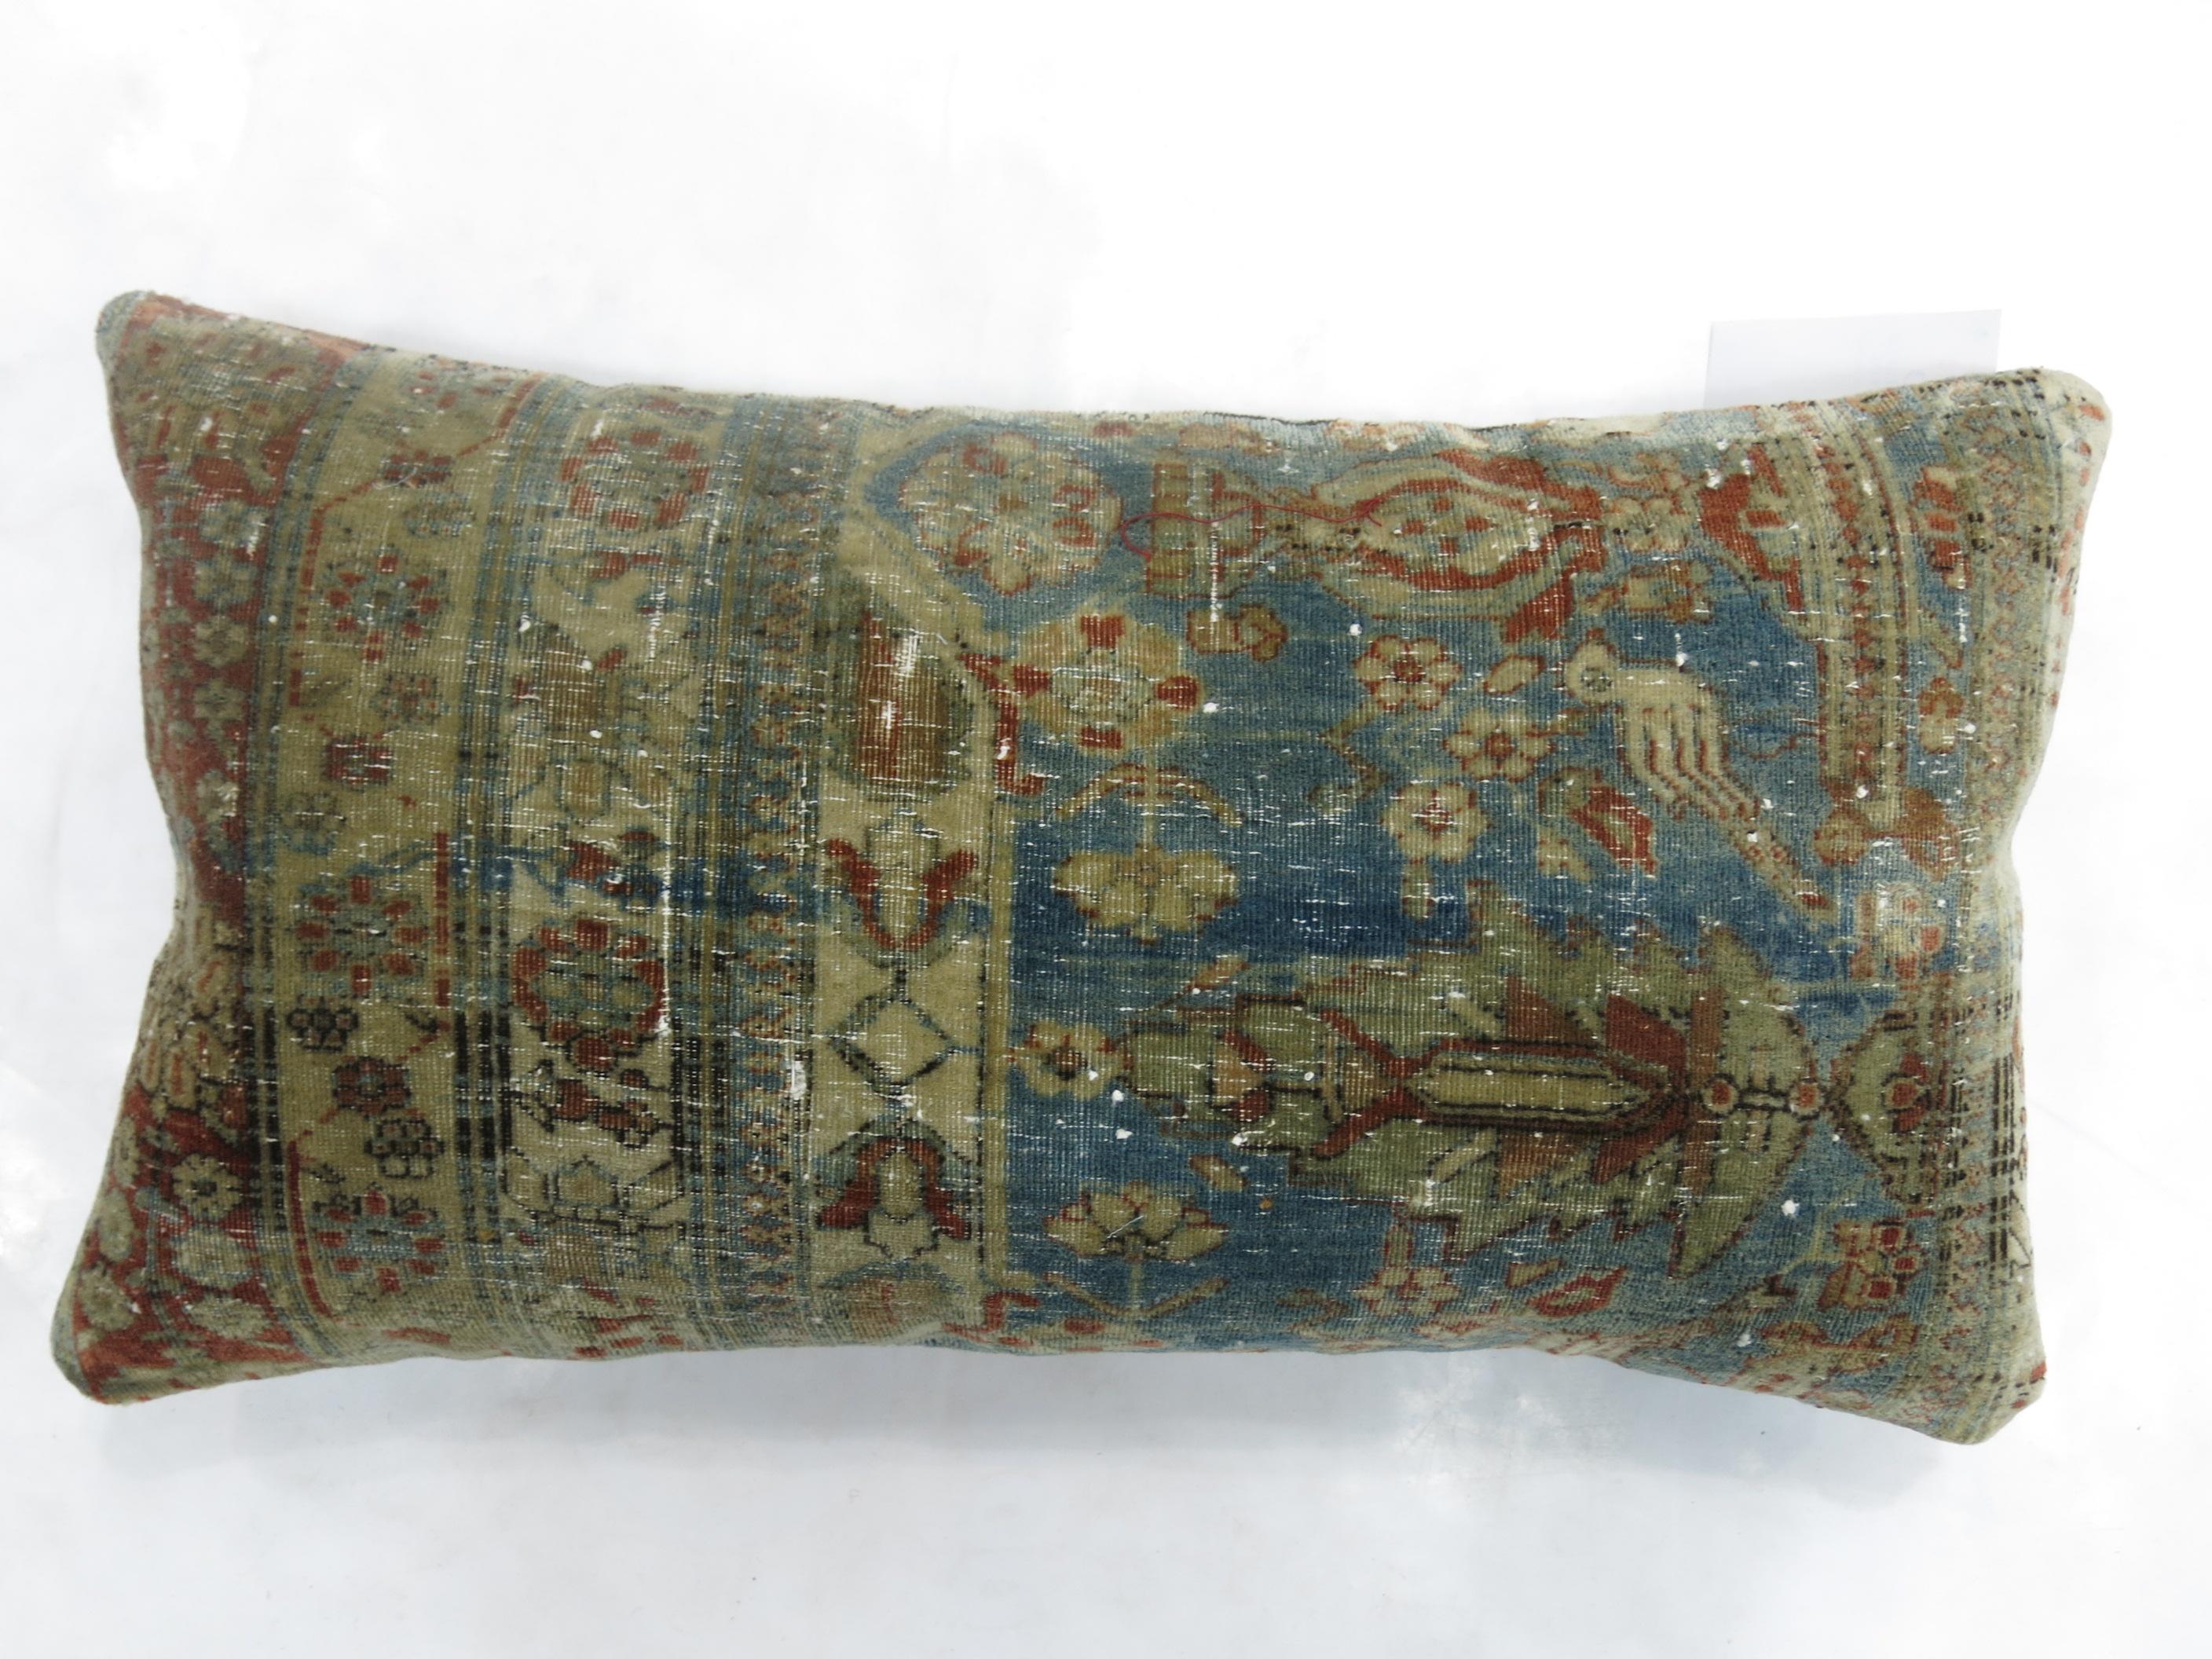 Superfine Mohtasham Kashan Persian Rug Bolster Pillow In Good Condition For Sale In New York, NY